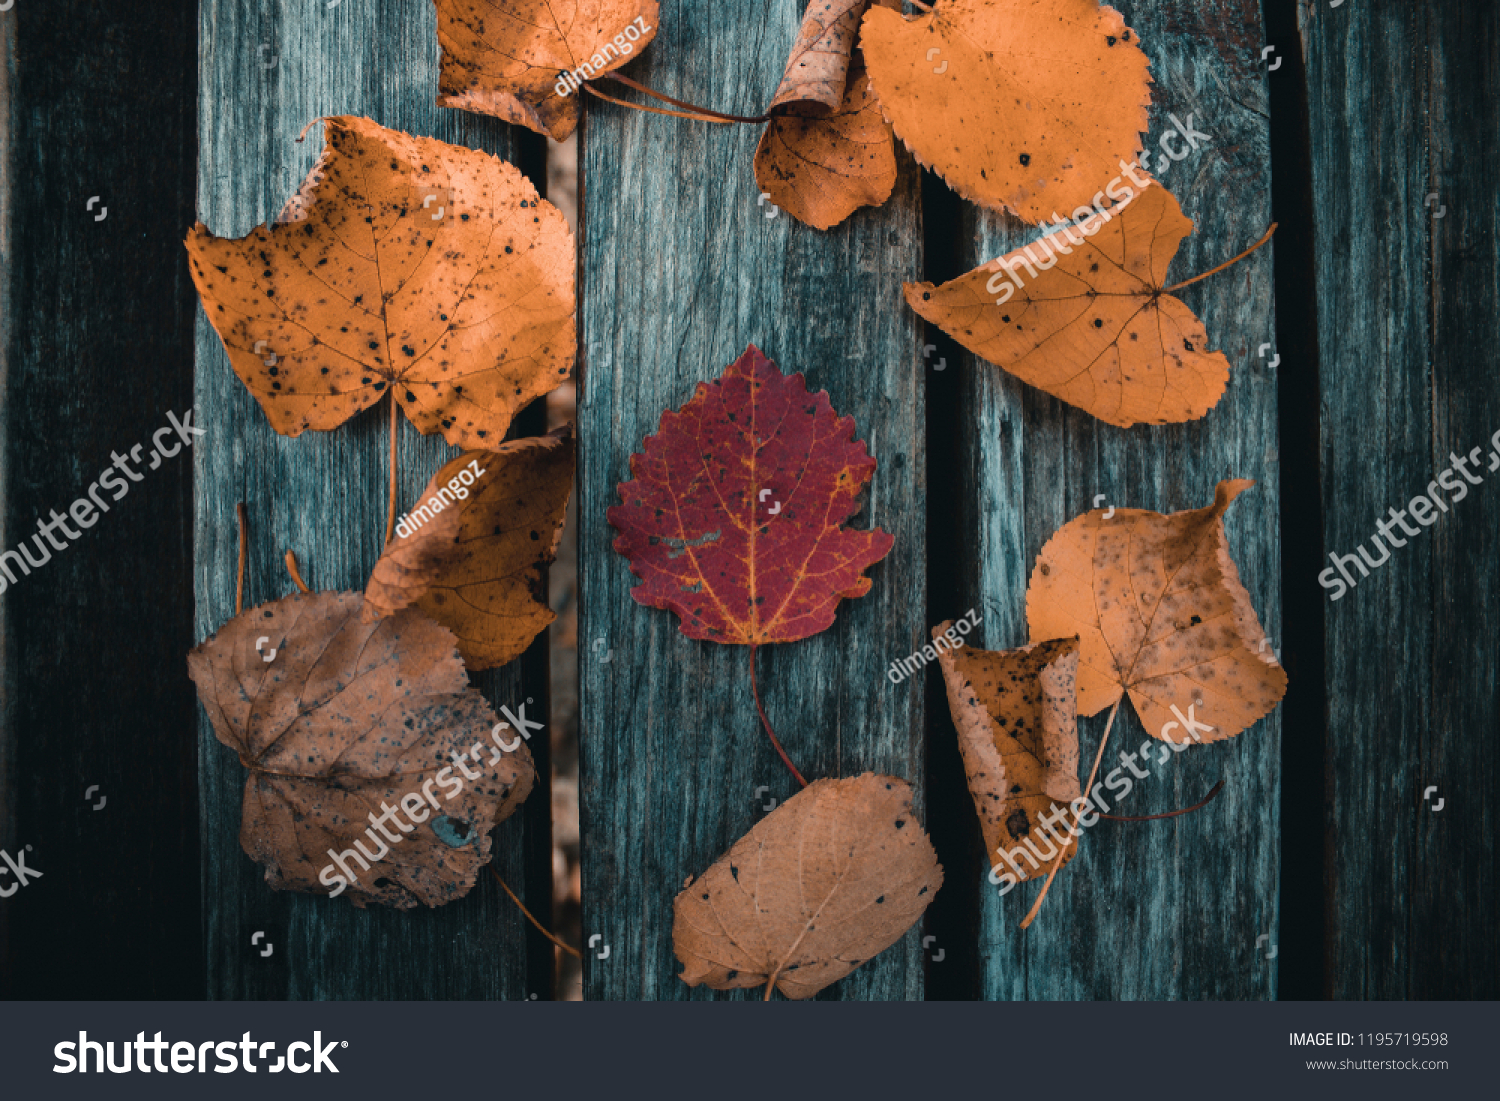 the leaves on the boards #1195719598